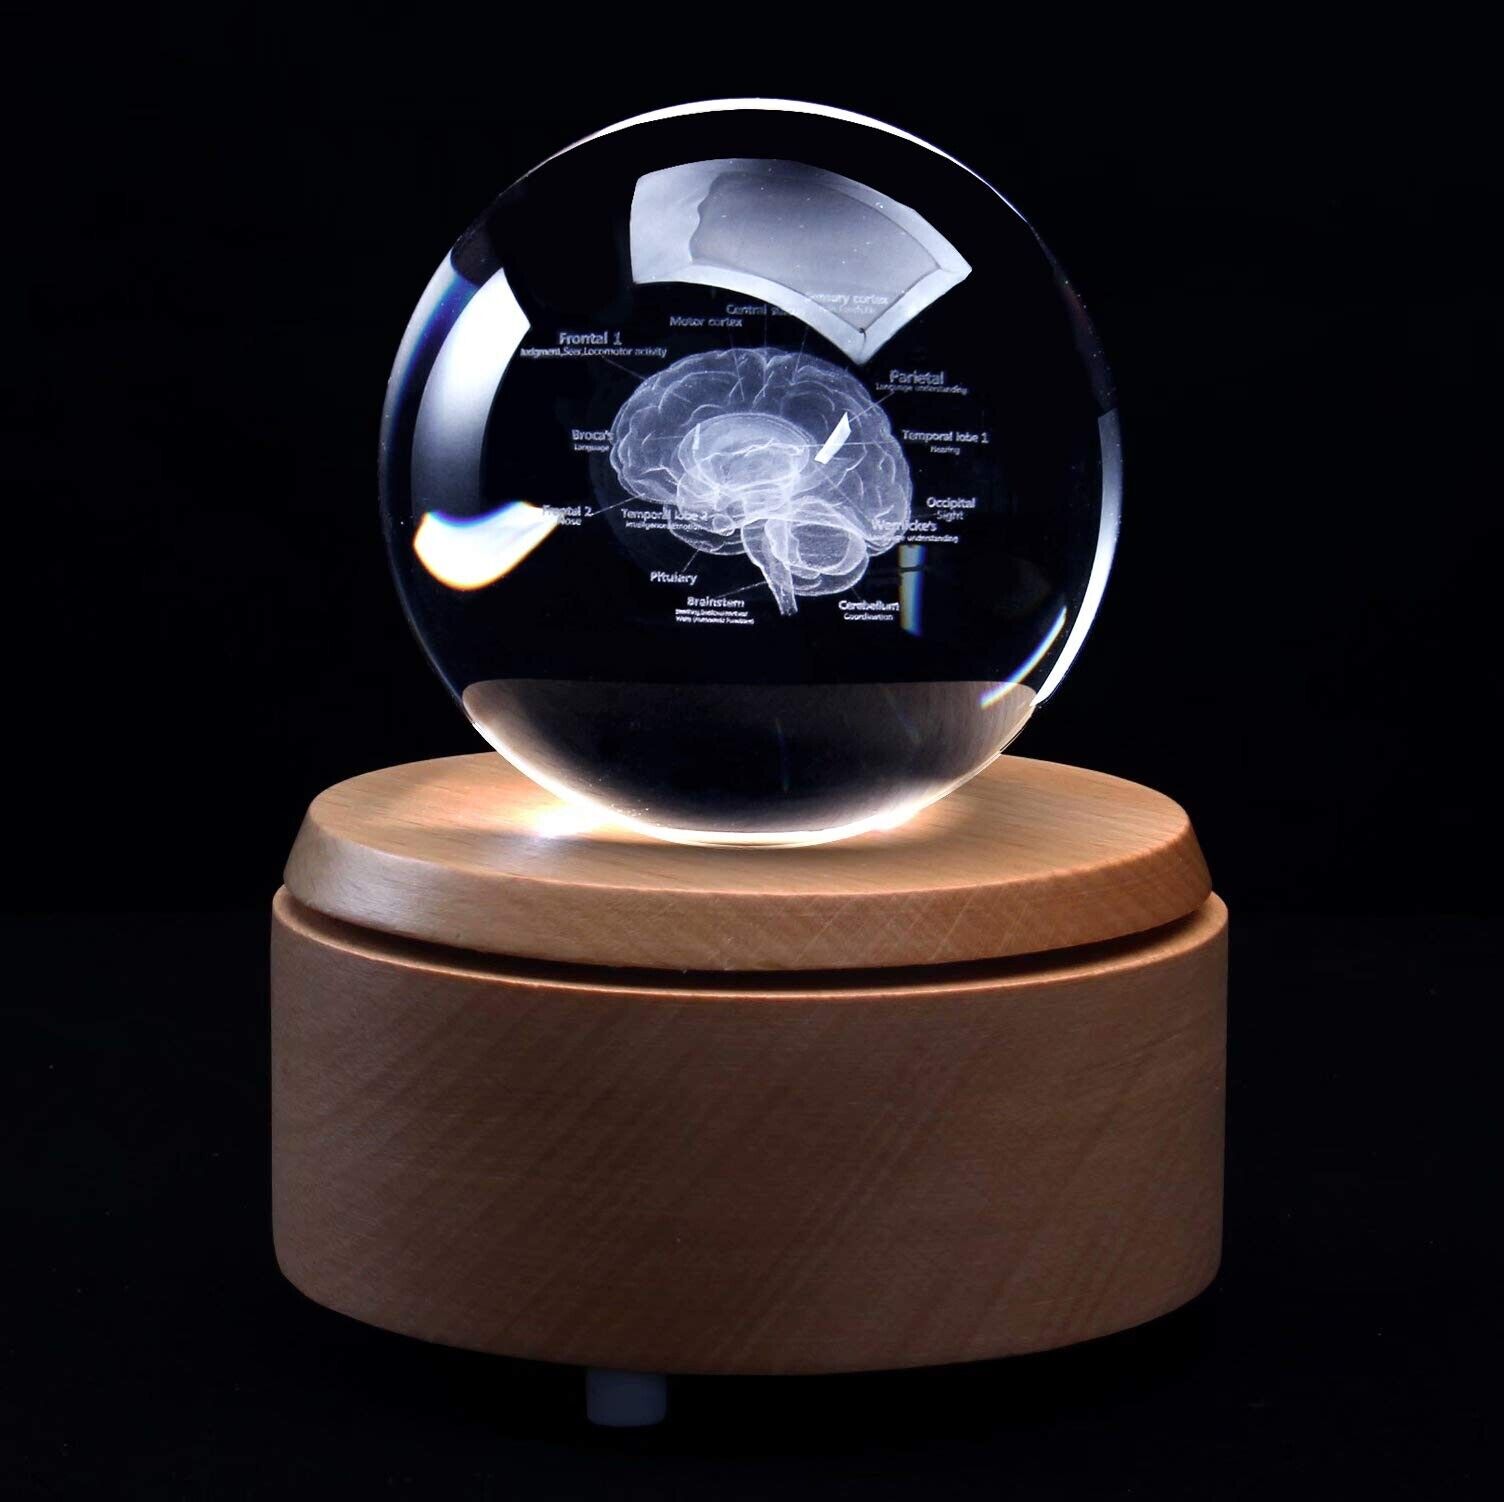 3D Human Brain with Labels Anatomical Model Paperweight(Laser Etched) in Crys...